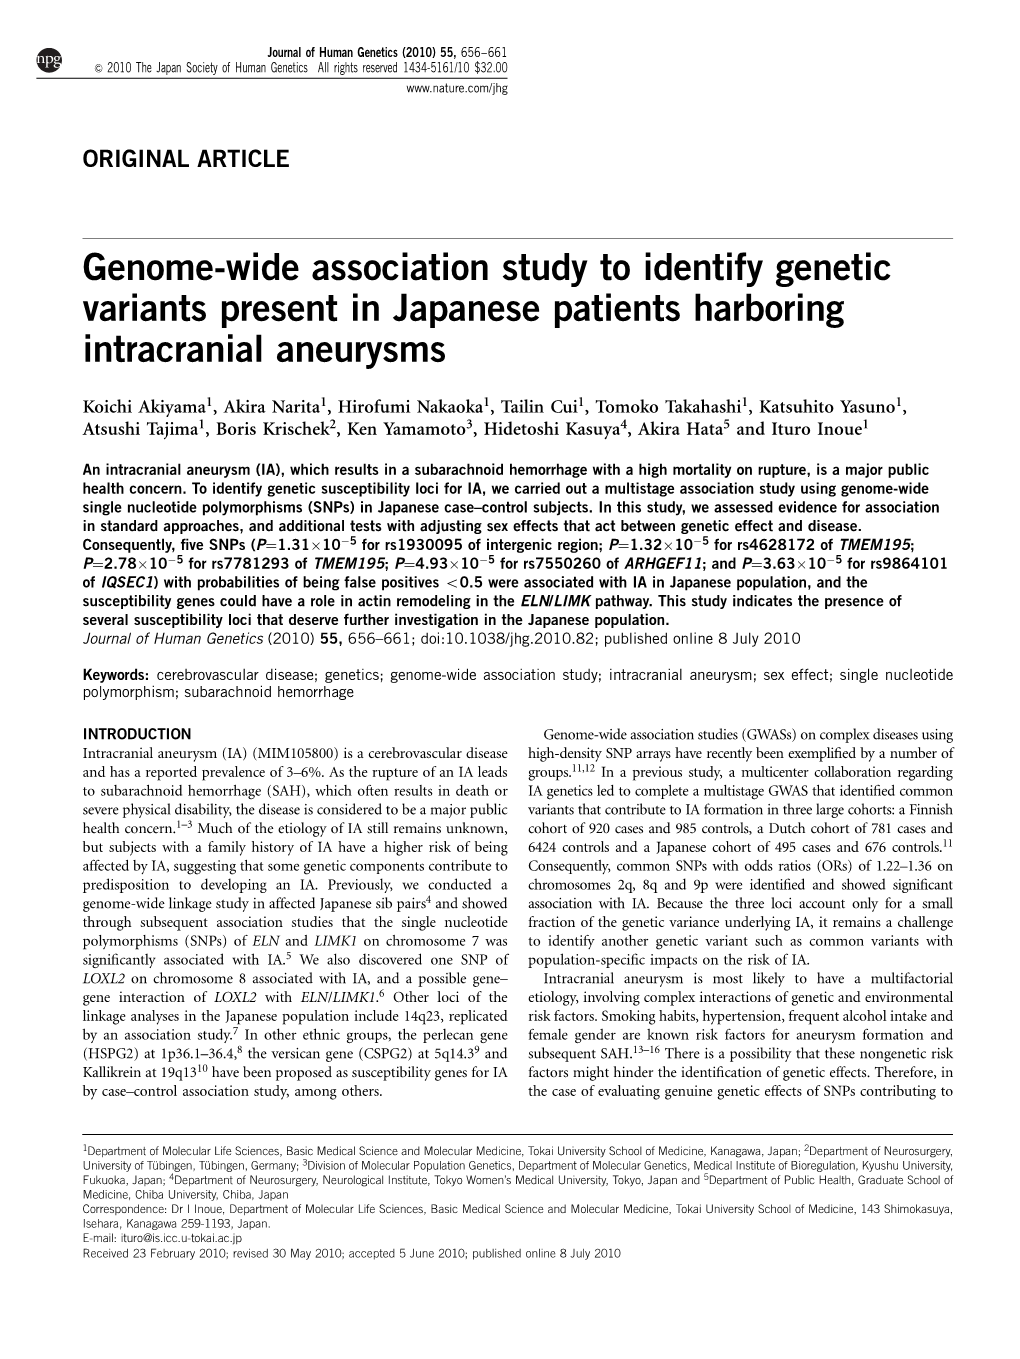 Genome-Wide Association Study to Identify Genetic Variants Present in Japanese Patients Harboring Intracranial Aneurysms